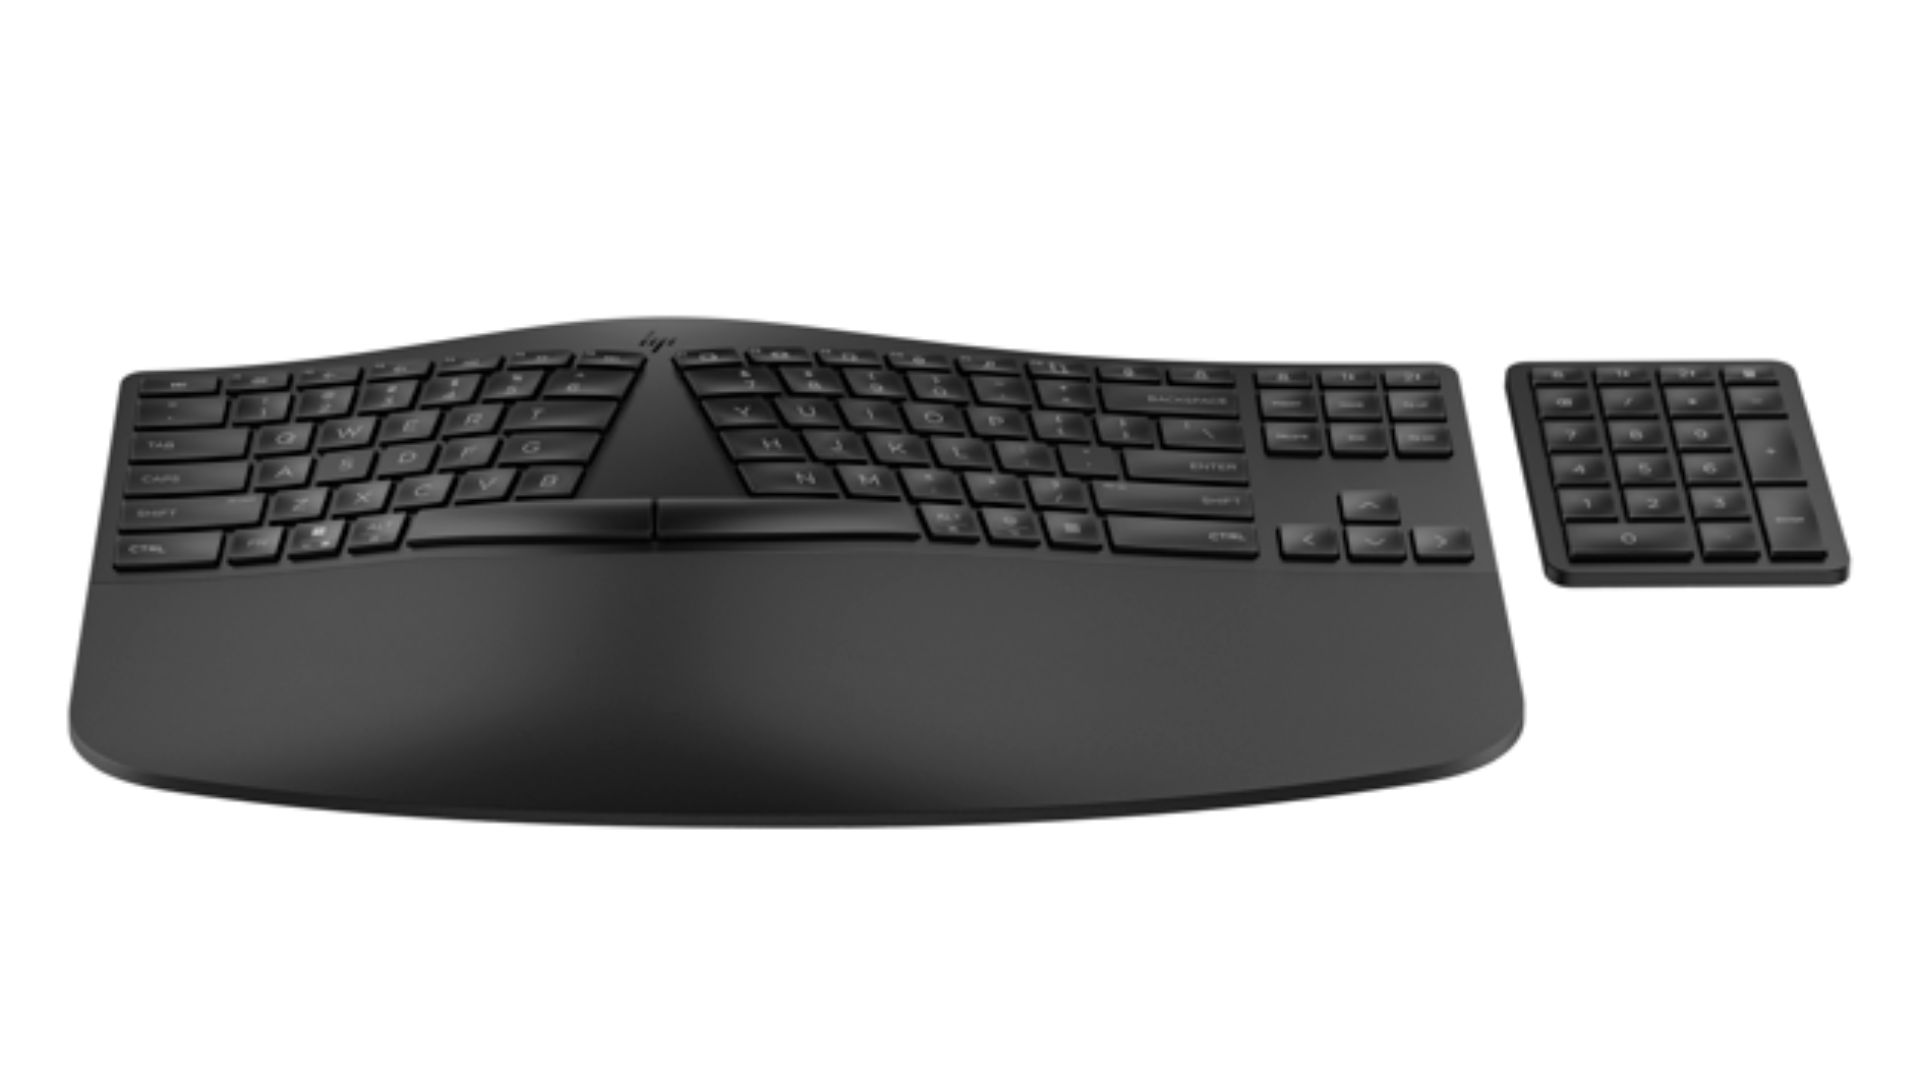 HP 960 Ergonomic Wireless Keyboard with separate number pad